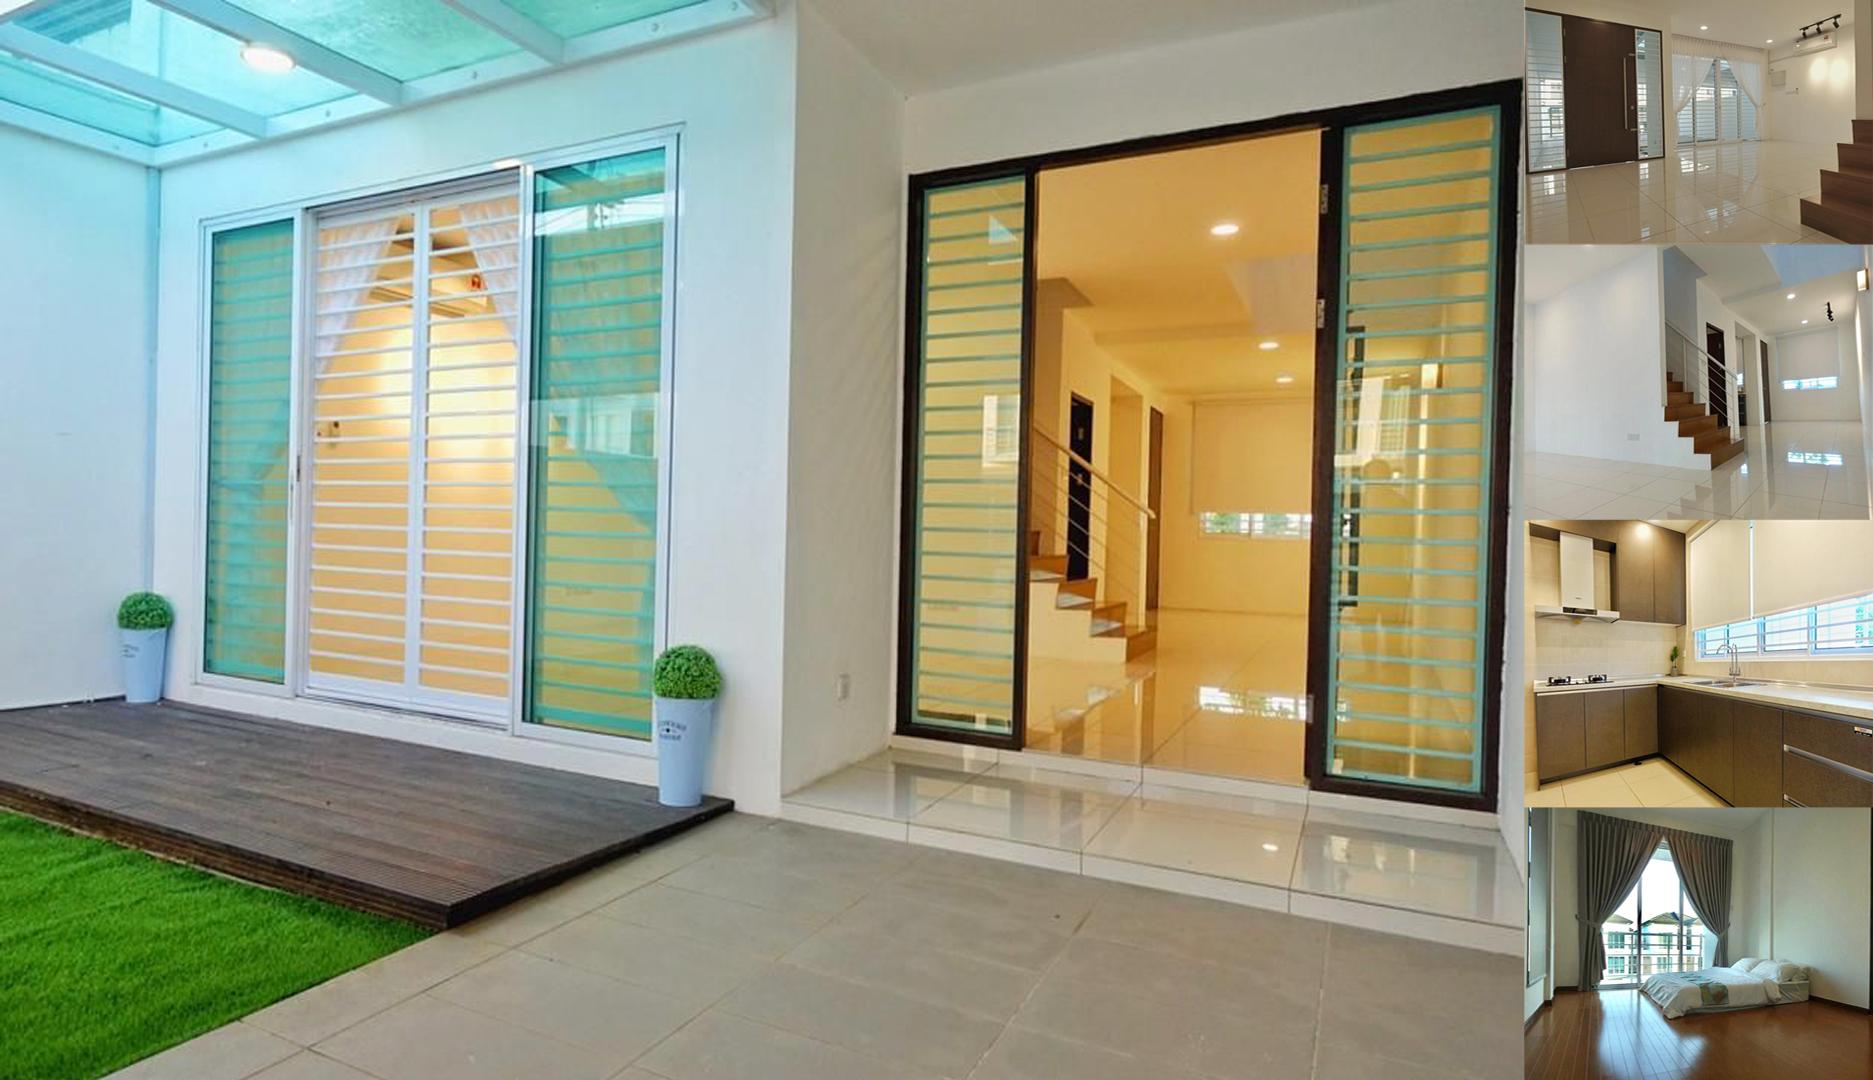 Spacious 3 Storey Terraced house For Rent! located at Palm Residence, Jalan Ensing, Stapok.